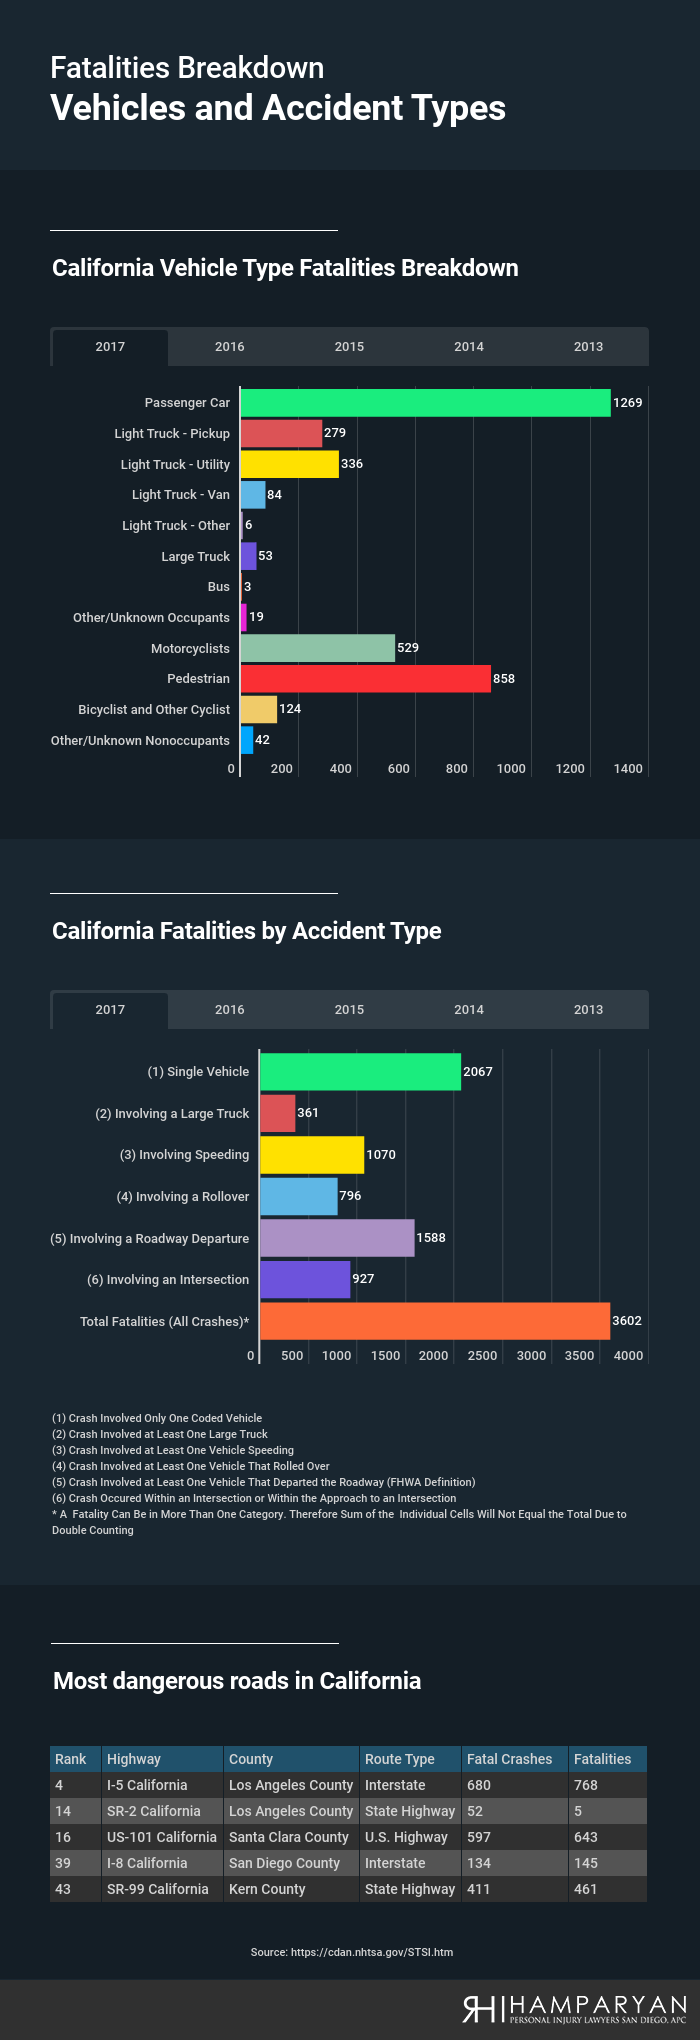 Fatalities Breakdown: Vehicles and Accident Types